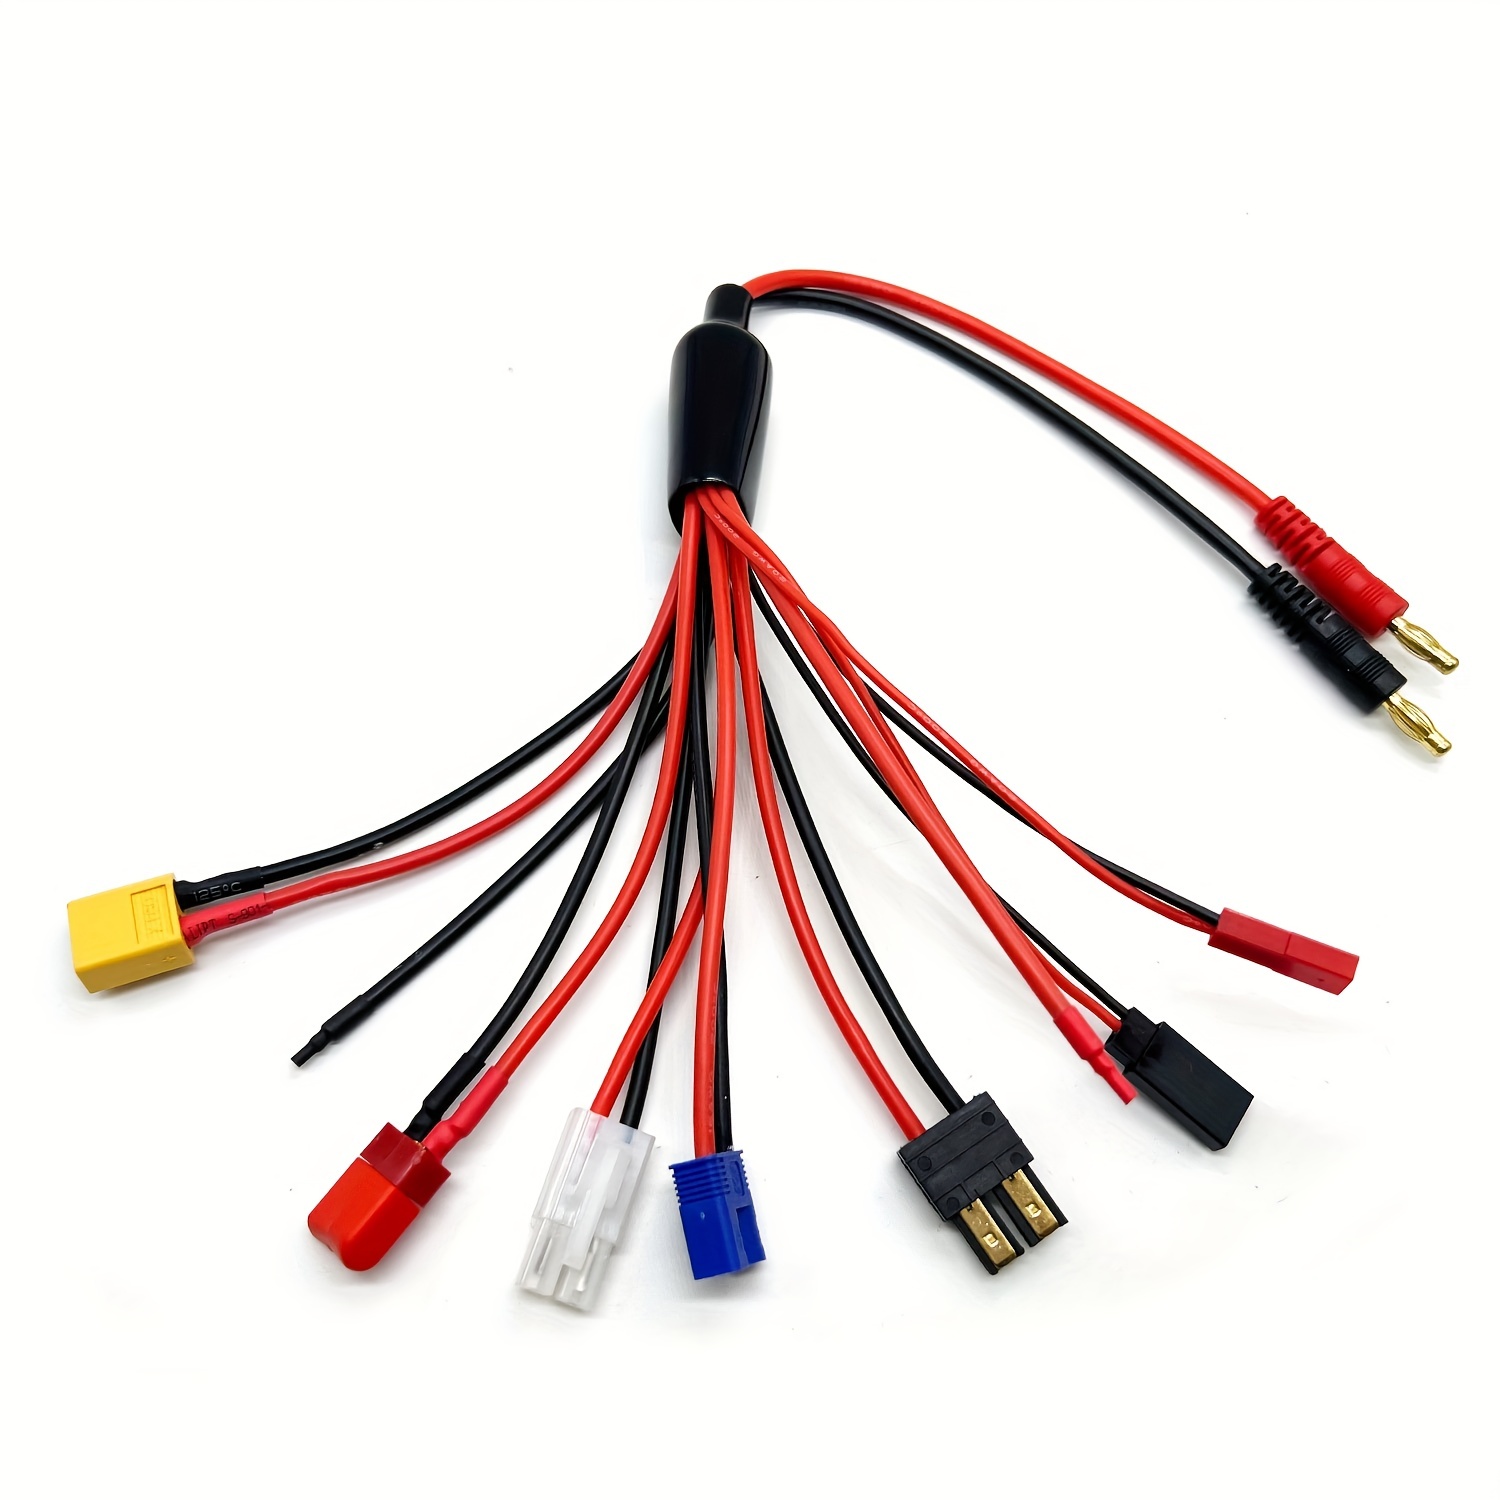 Pardarsey Rc Lipo Battery Charger Adapter Connector Splitter Cable 8 In 1  Octopus Convert Wire 4 0mm Banana Plug Tamiya Ec3 Jst Futaba Xt60 T Dean, Find Great Deals